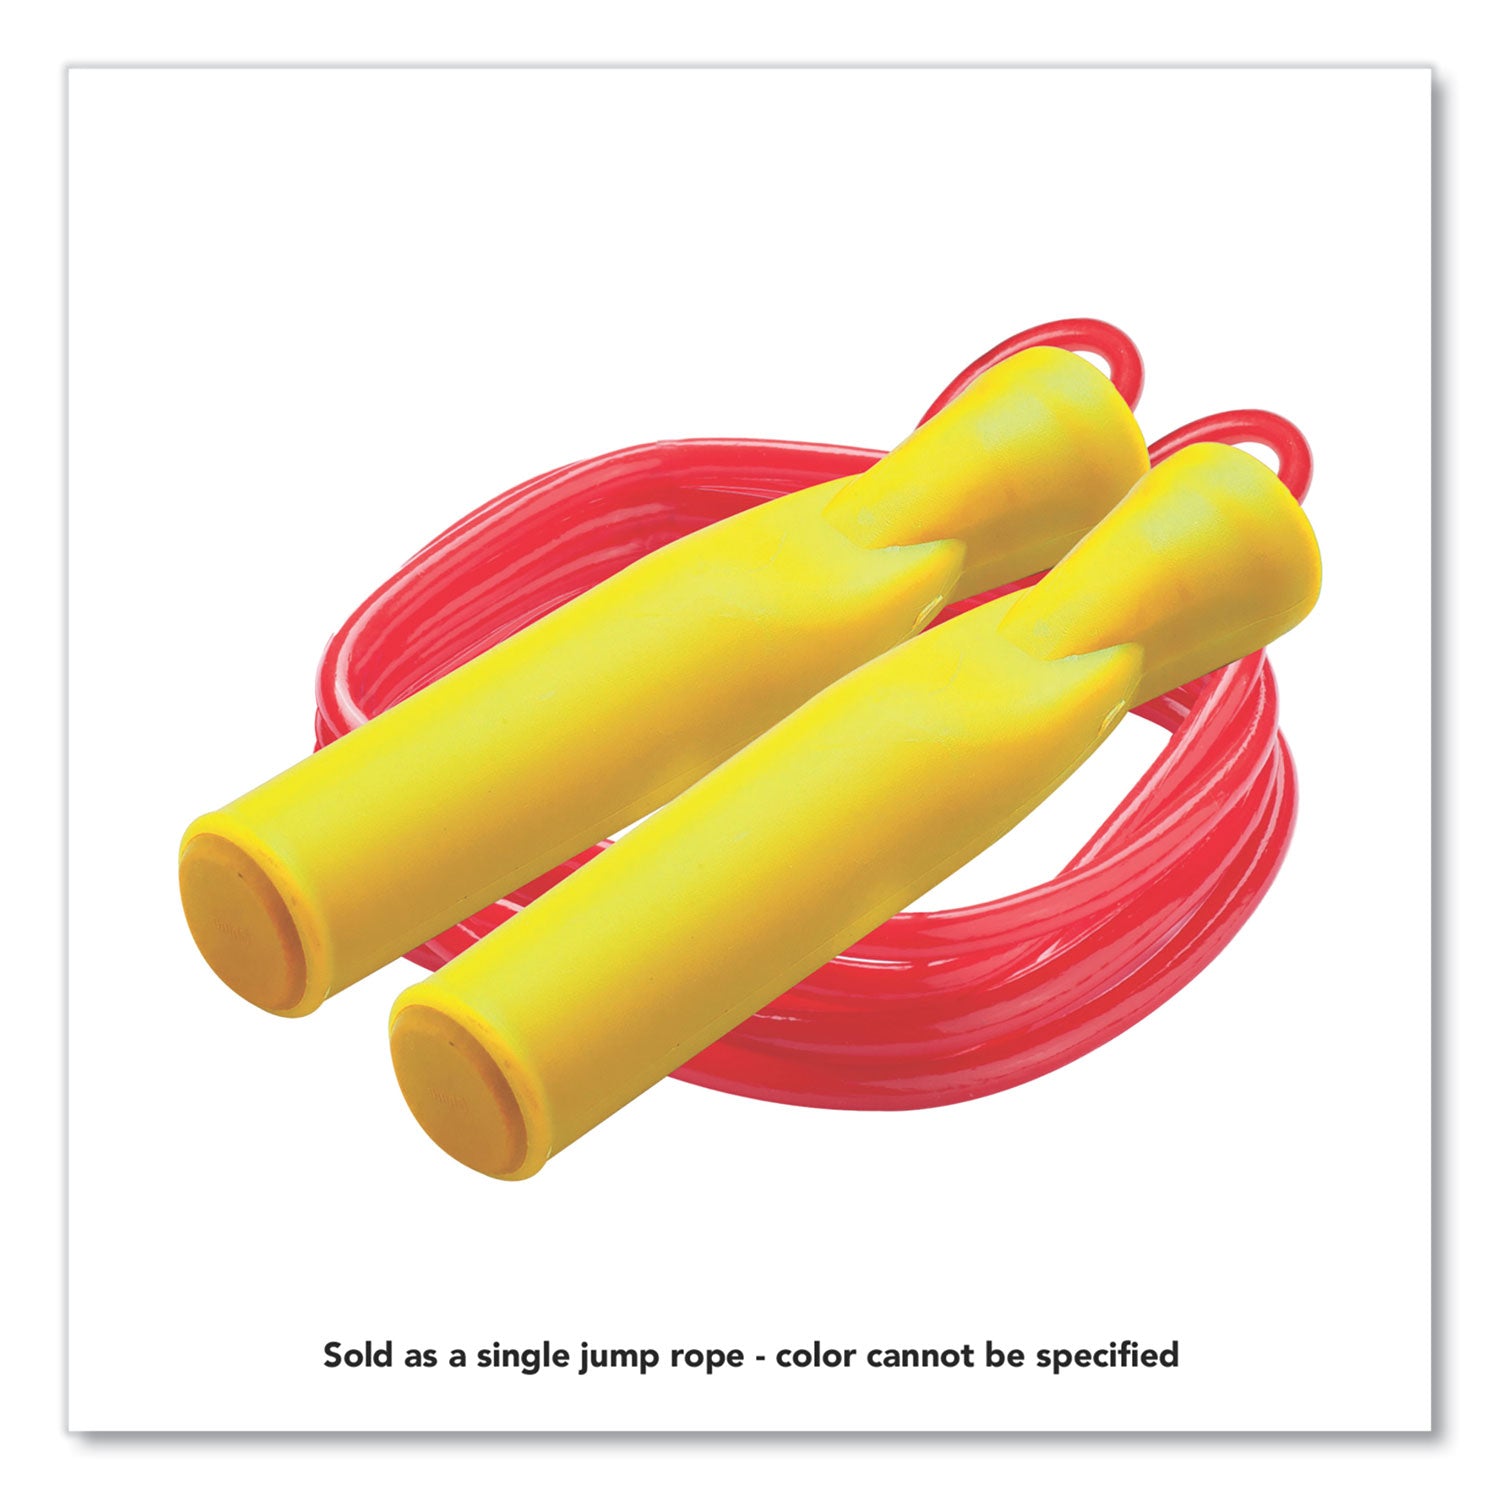 ball-bearing-speed-rope-8-ft-randomly-assorted-colors_csibsr8 - 6